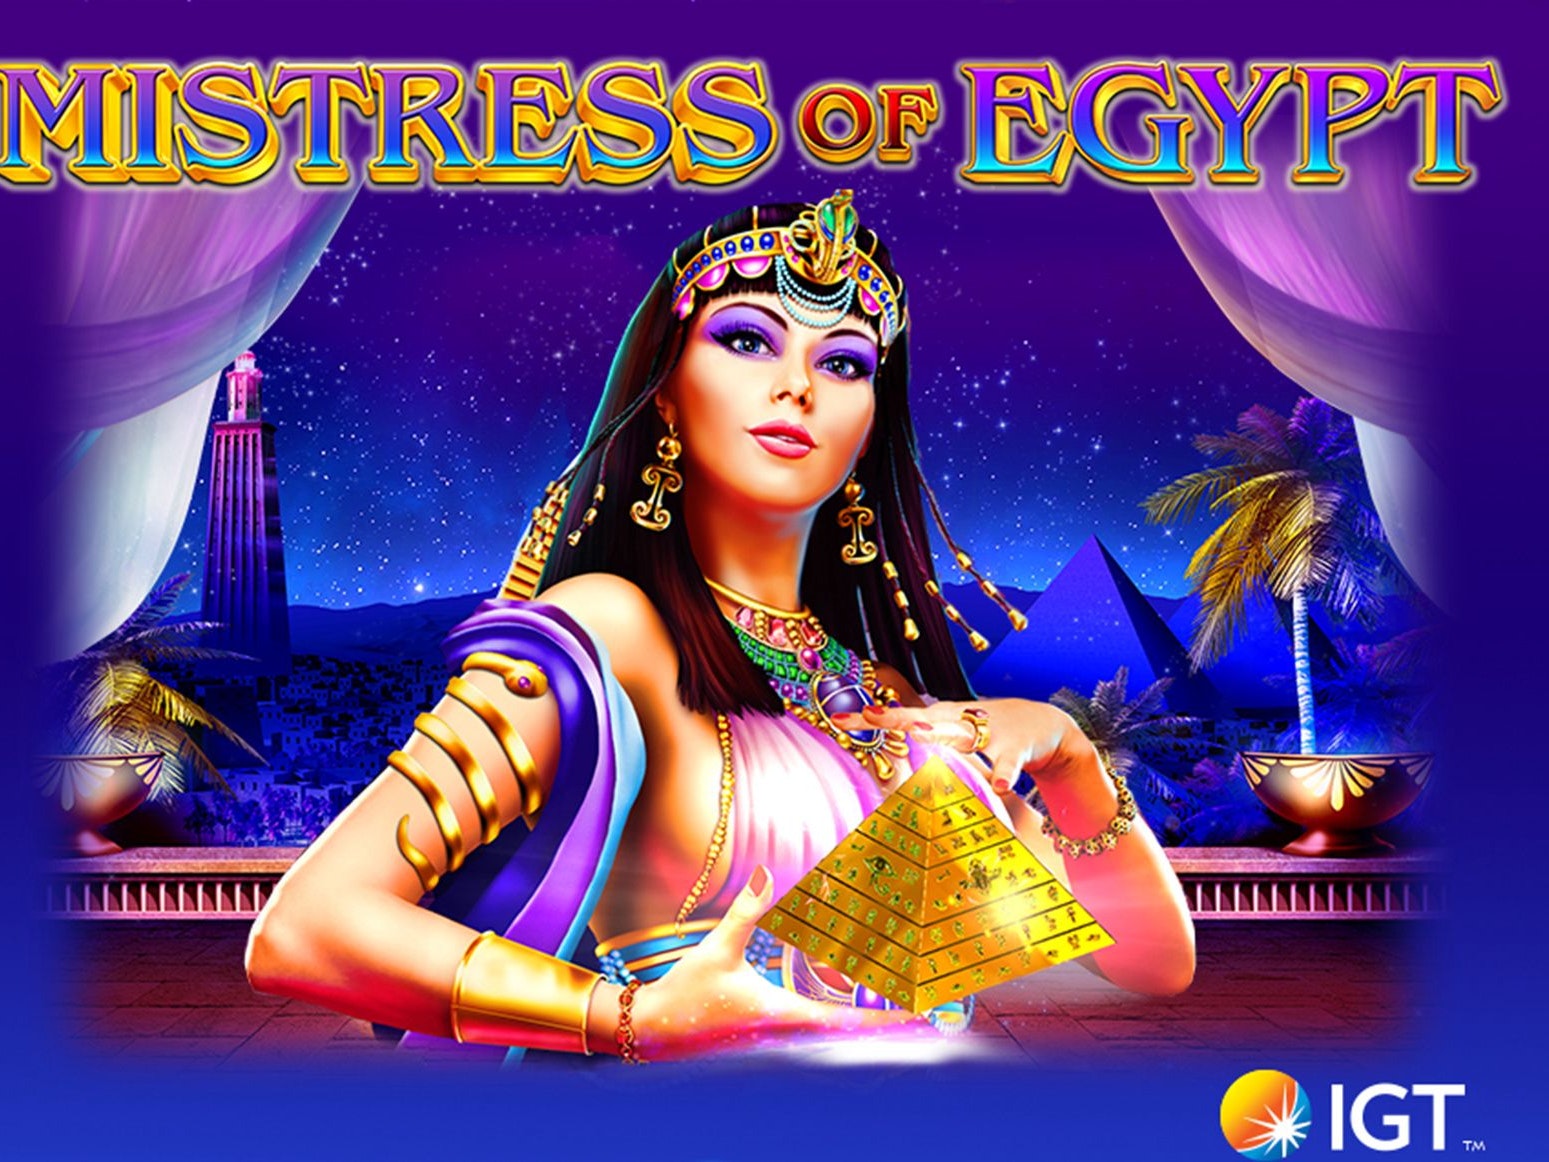 Play IGT's Mistress of Egypt Slot Machine Online for Free or Real Money